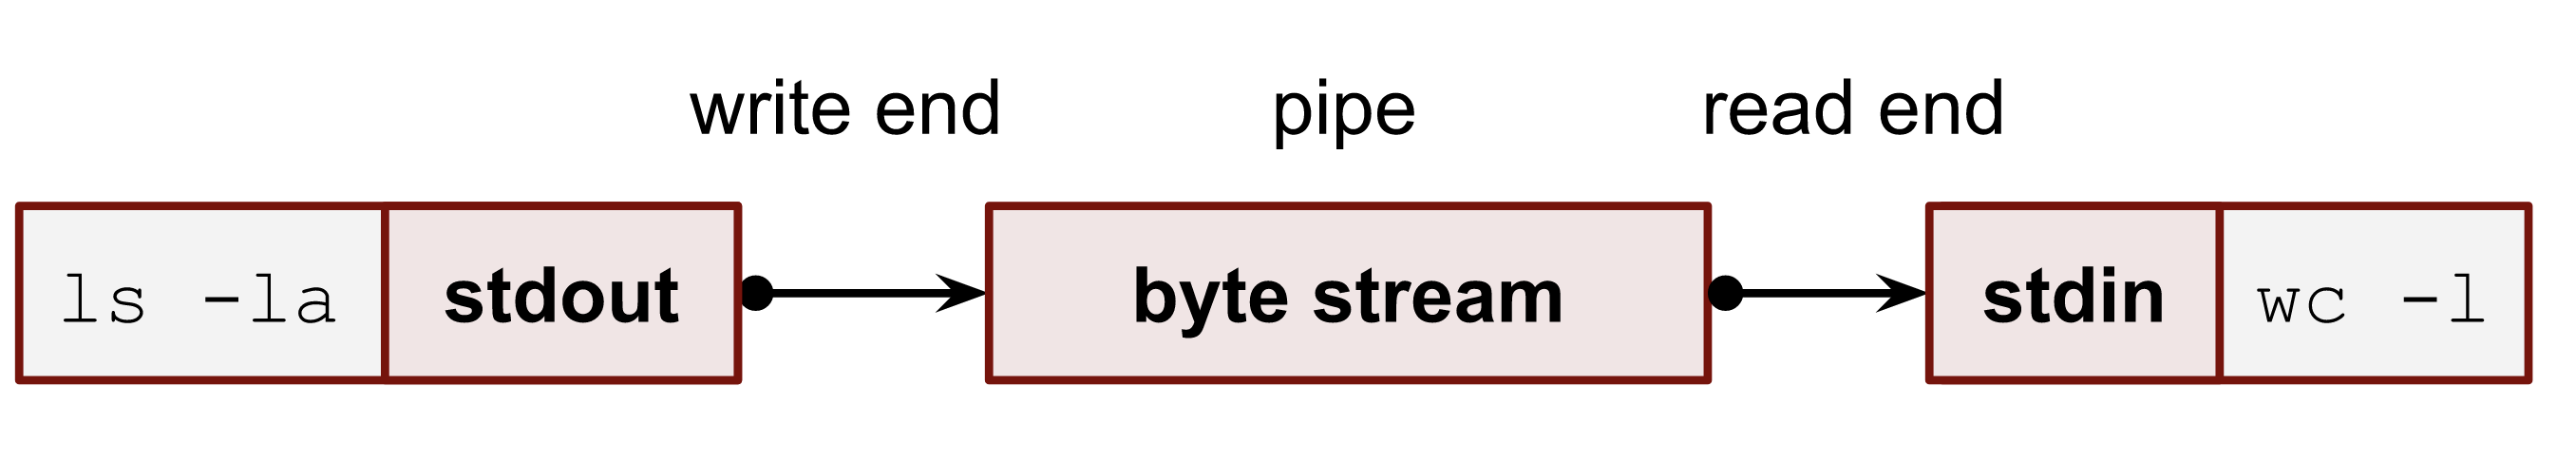 Using a pipe to connect 2 processes